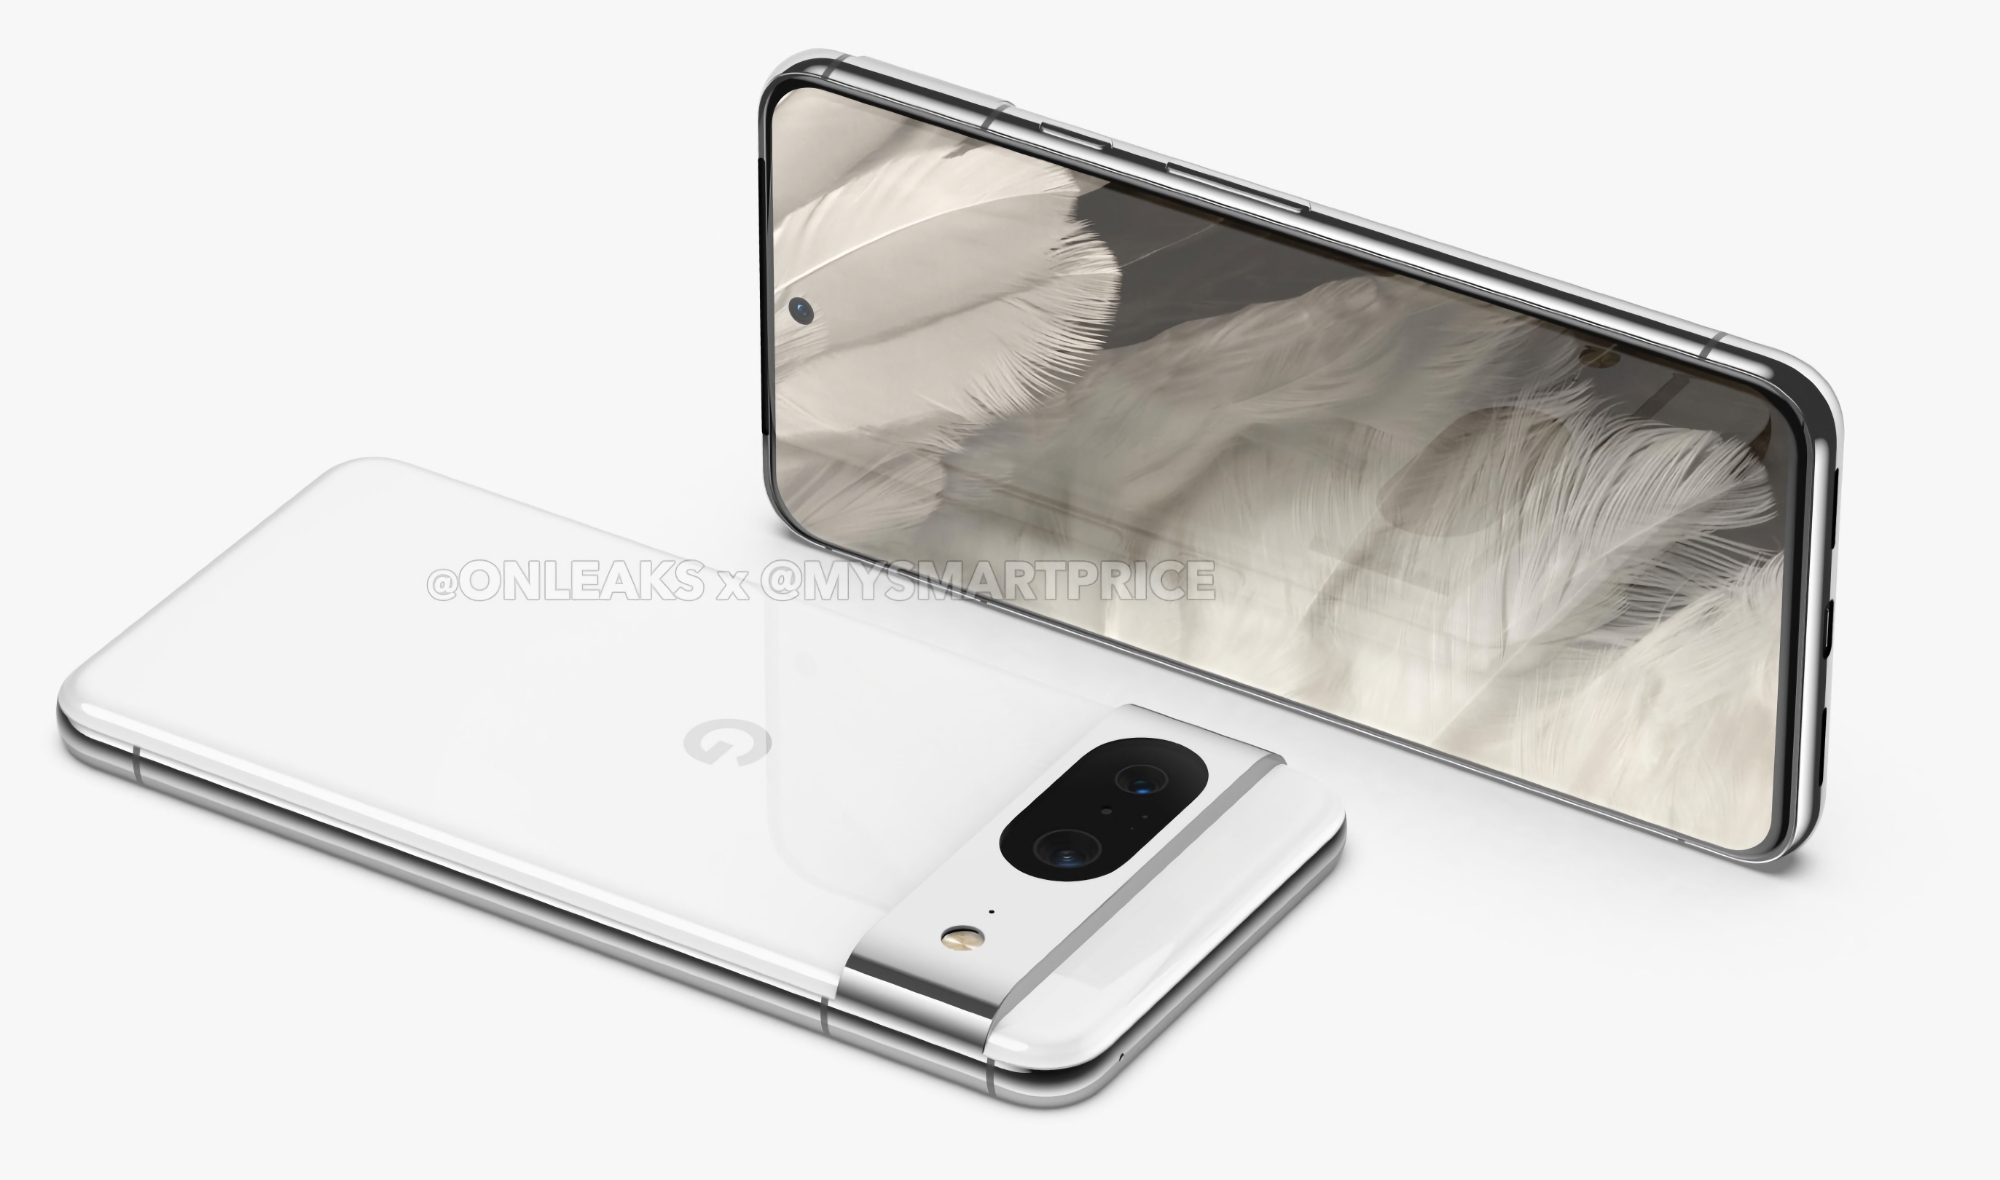 Wi-Fi 7, batteries up to 4,950mAh and charging support up to 27W: New details about Google's Pixel 8 and Pixel 8 Pro smartphones have emerged online